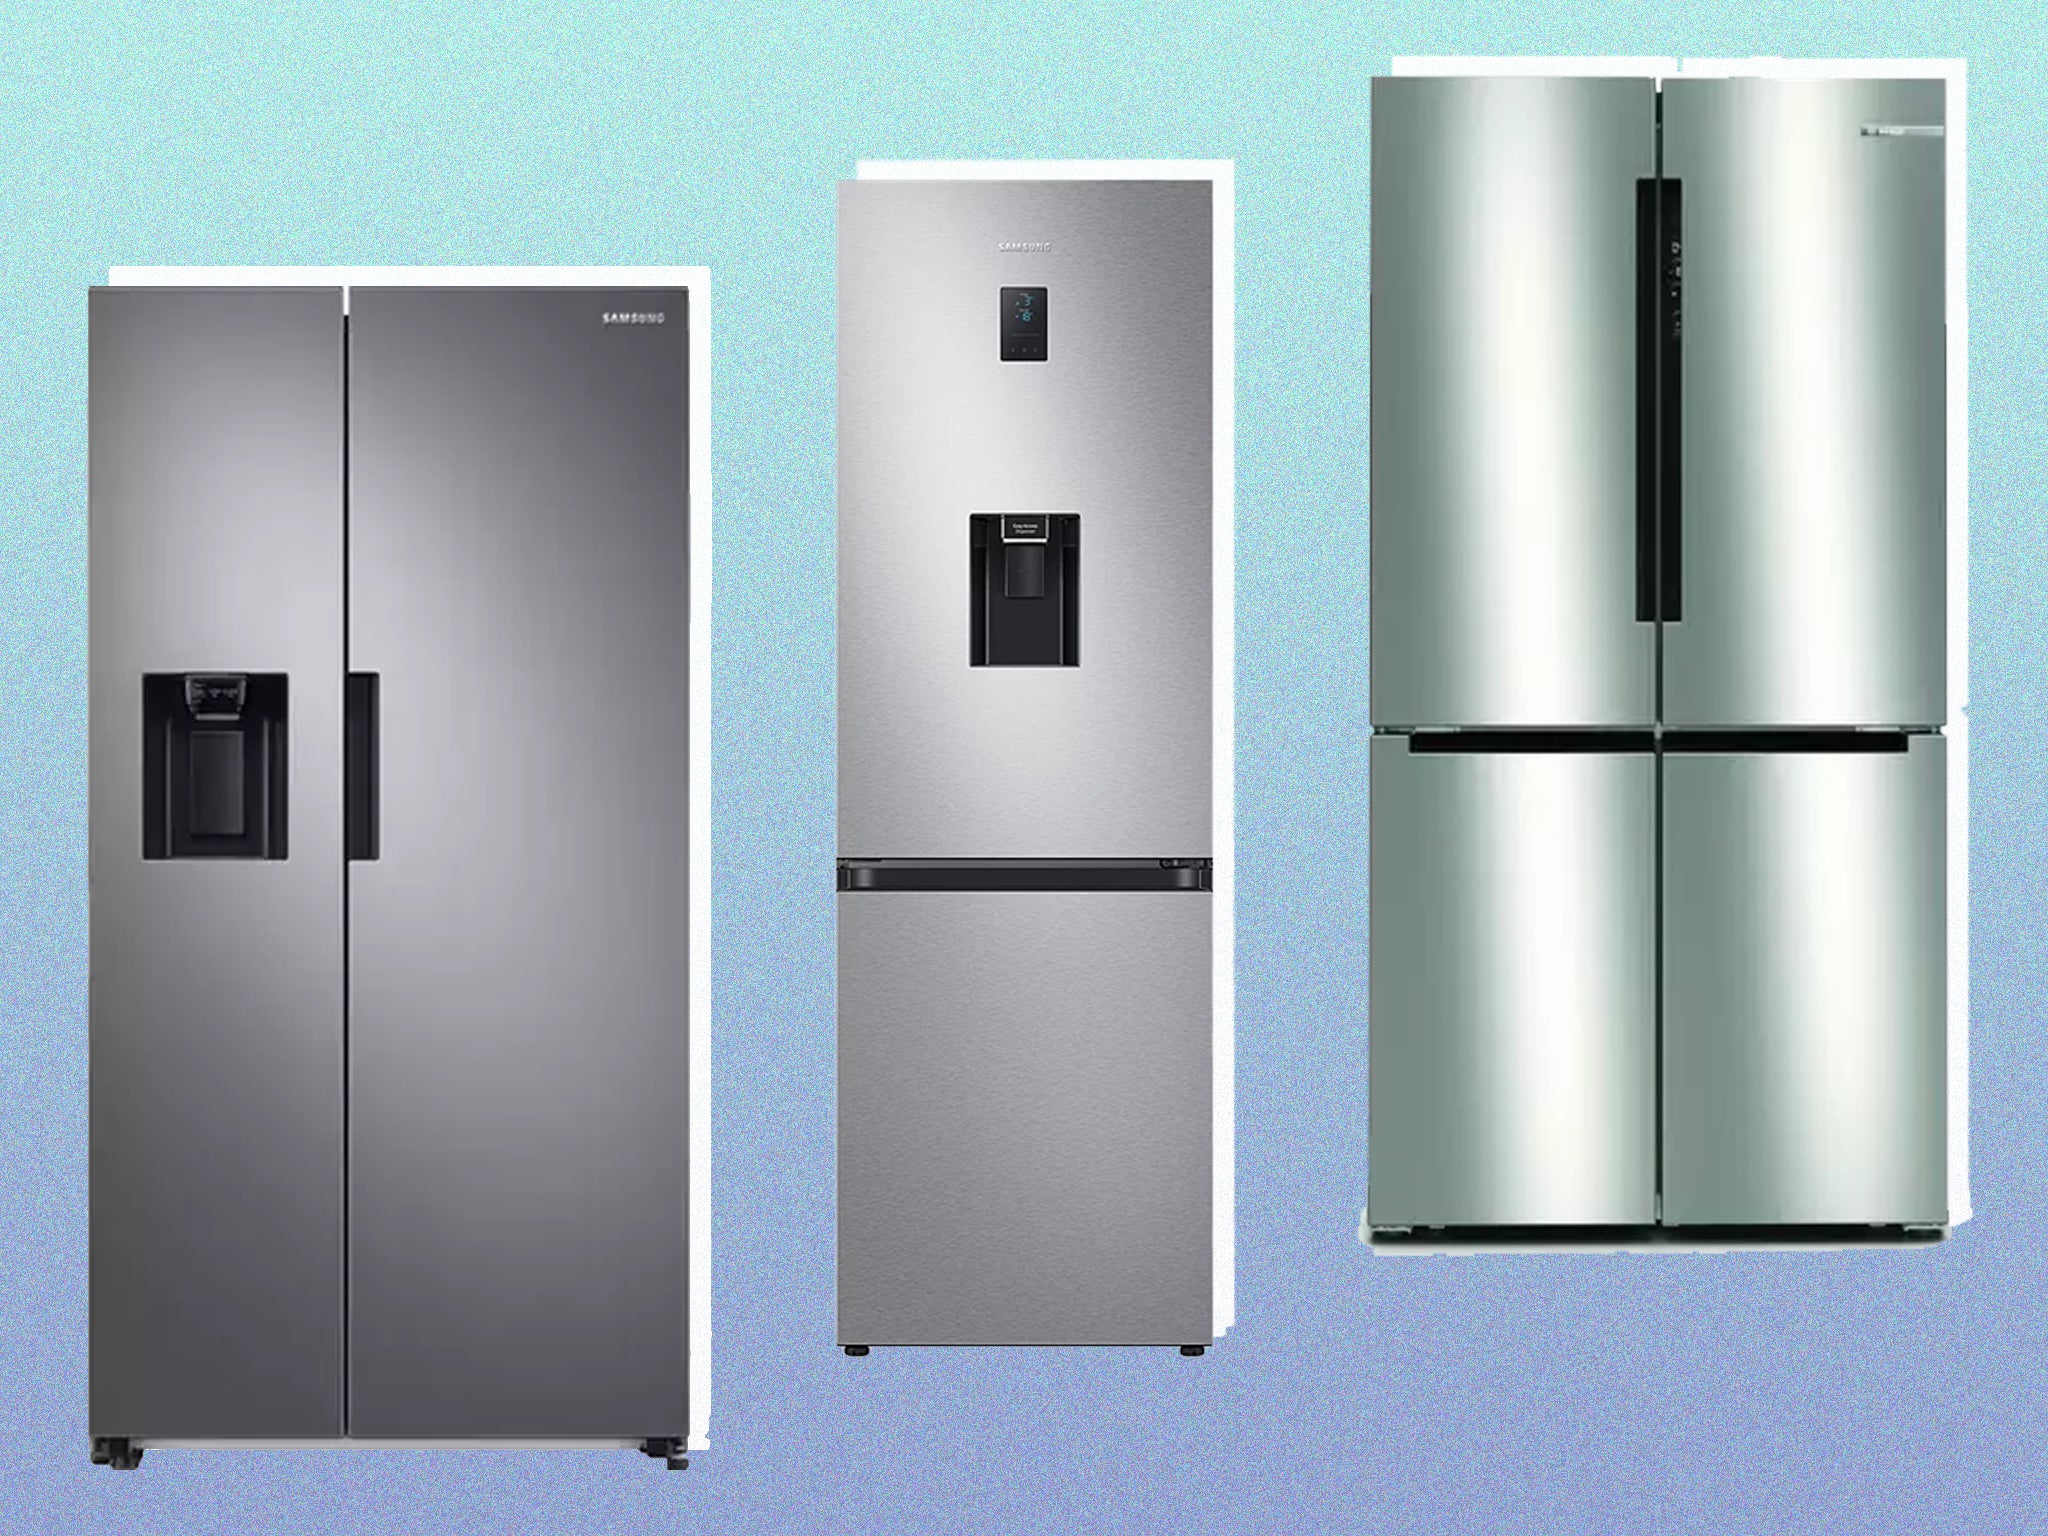 KBBFocus - Appliance trends: A round-up of the coolest fridge